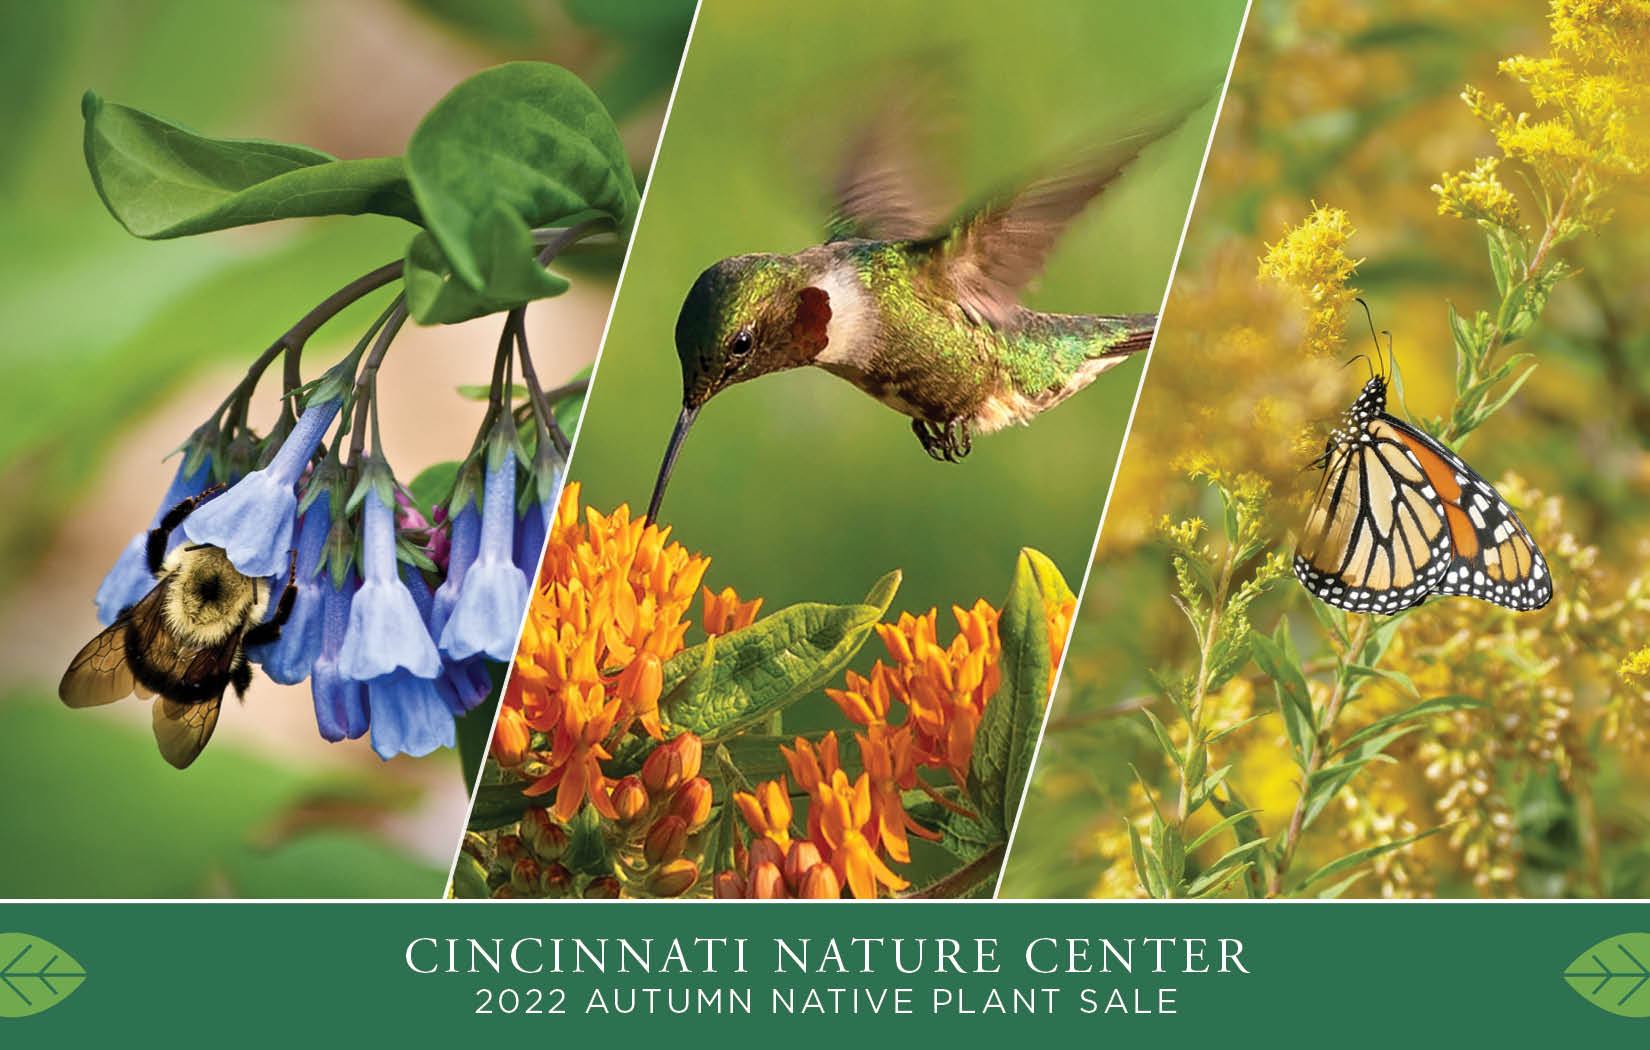 Autumn Native Plant Sale Catalog Cover with Bee, Hummingbird, and Monarch Butterfly on Flowers